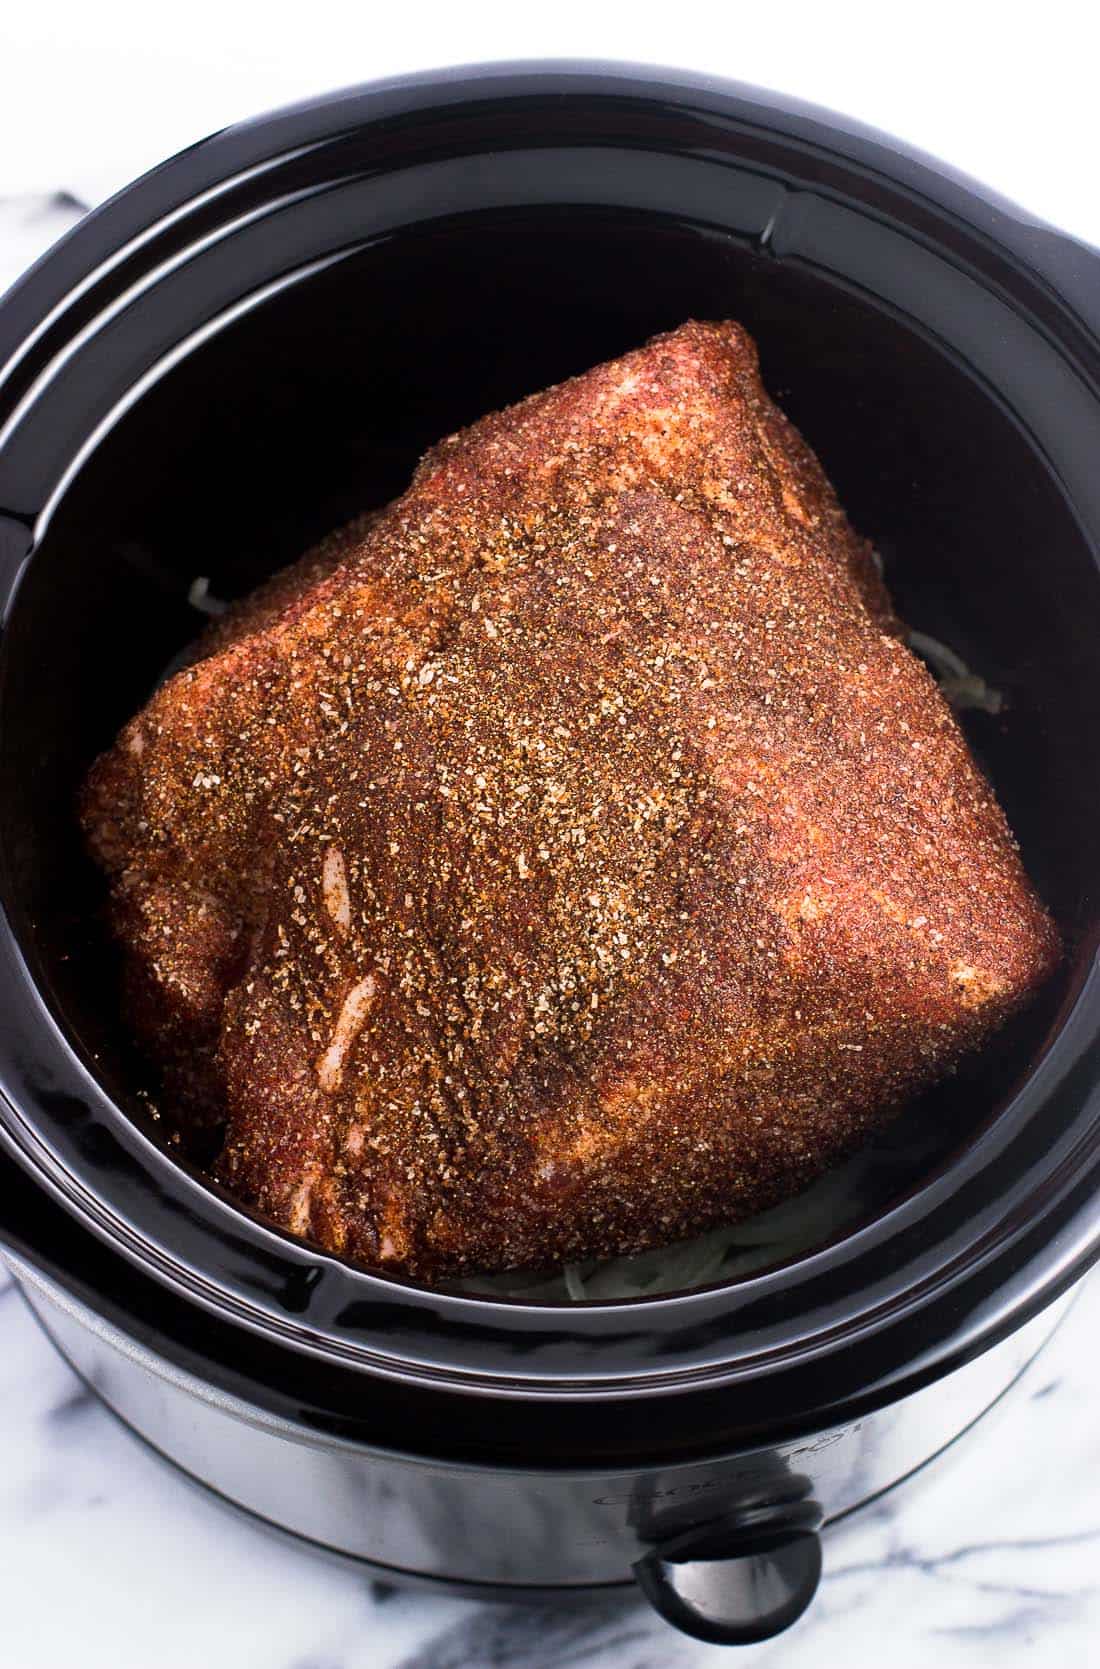 A seasoned Boston butt on a bed of sliced onion in the crock pot before being cooked